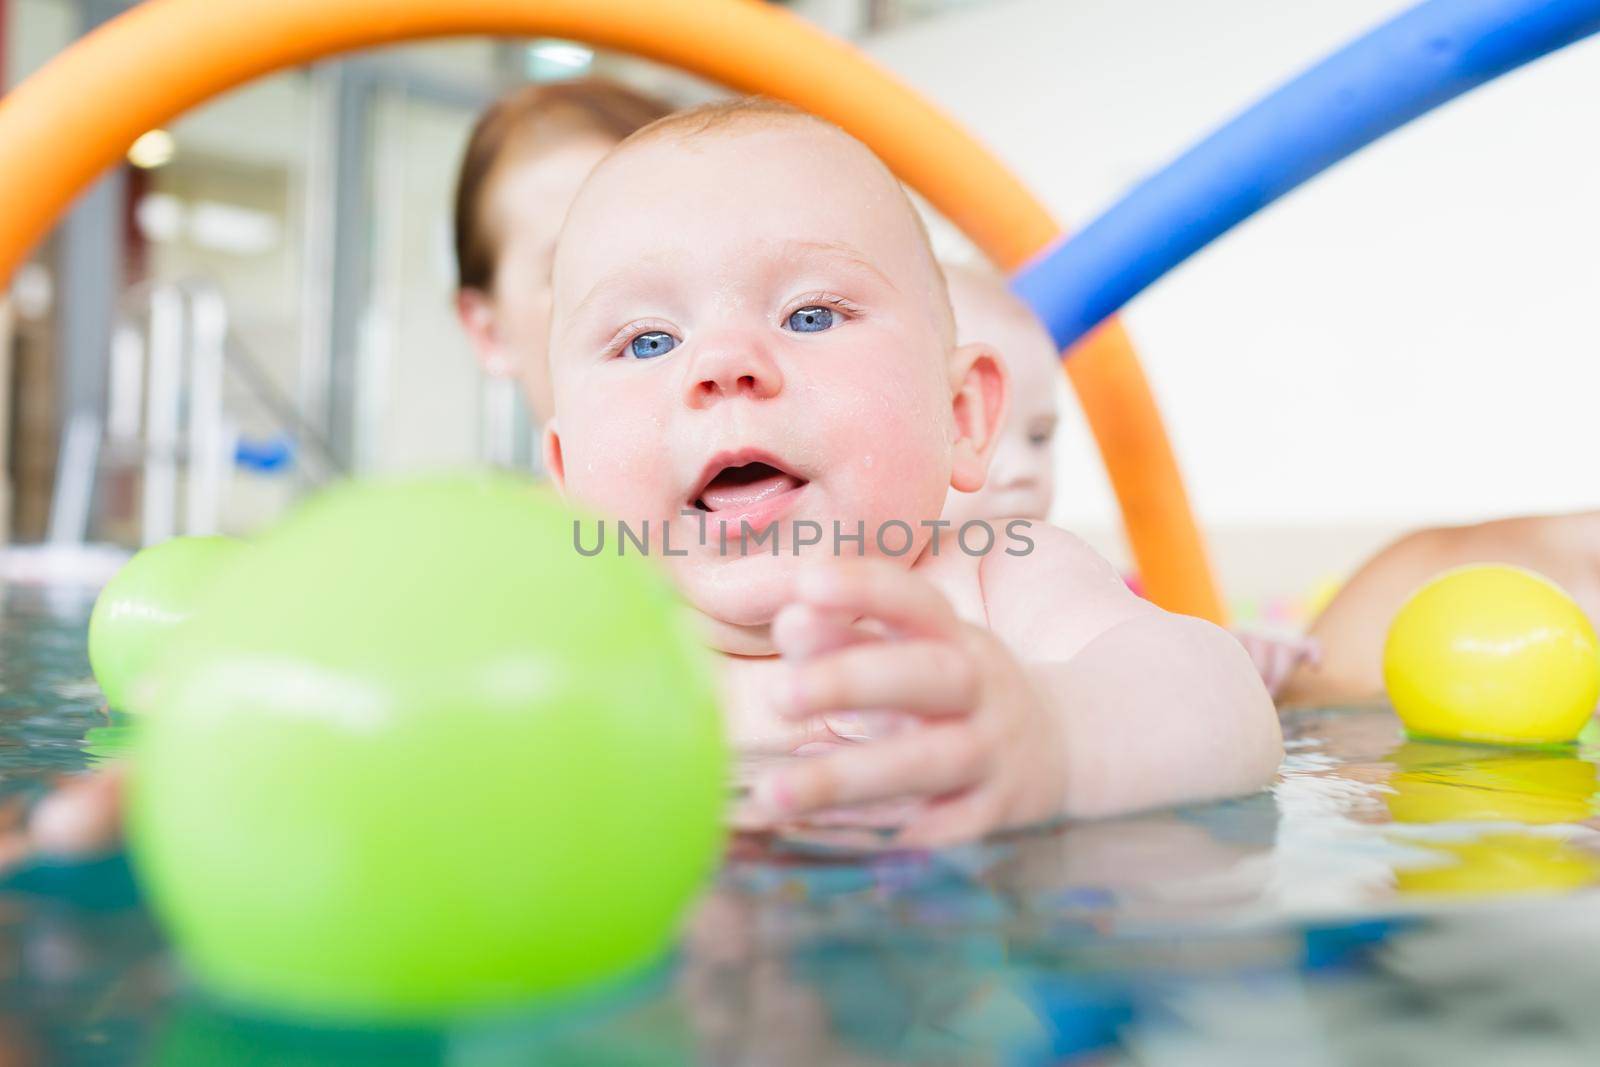 Baby in paddle pond reaching for toy ball in water by Kzenon